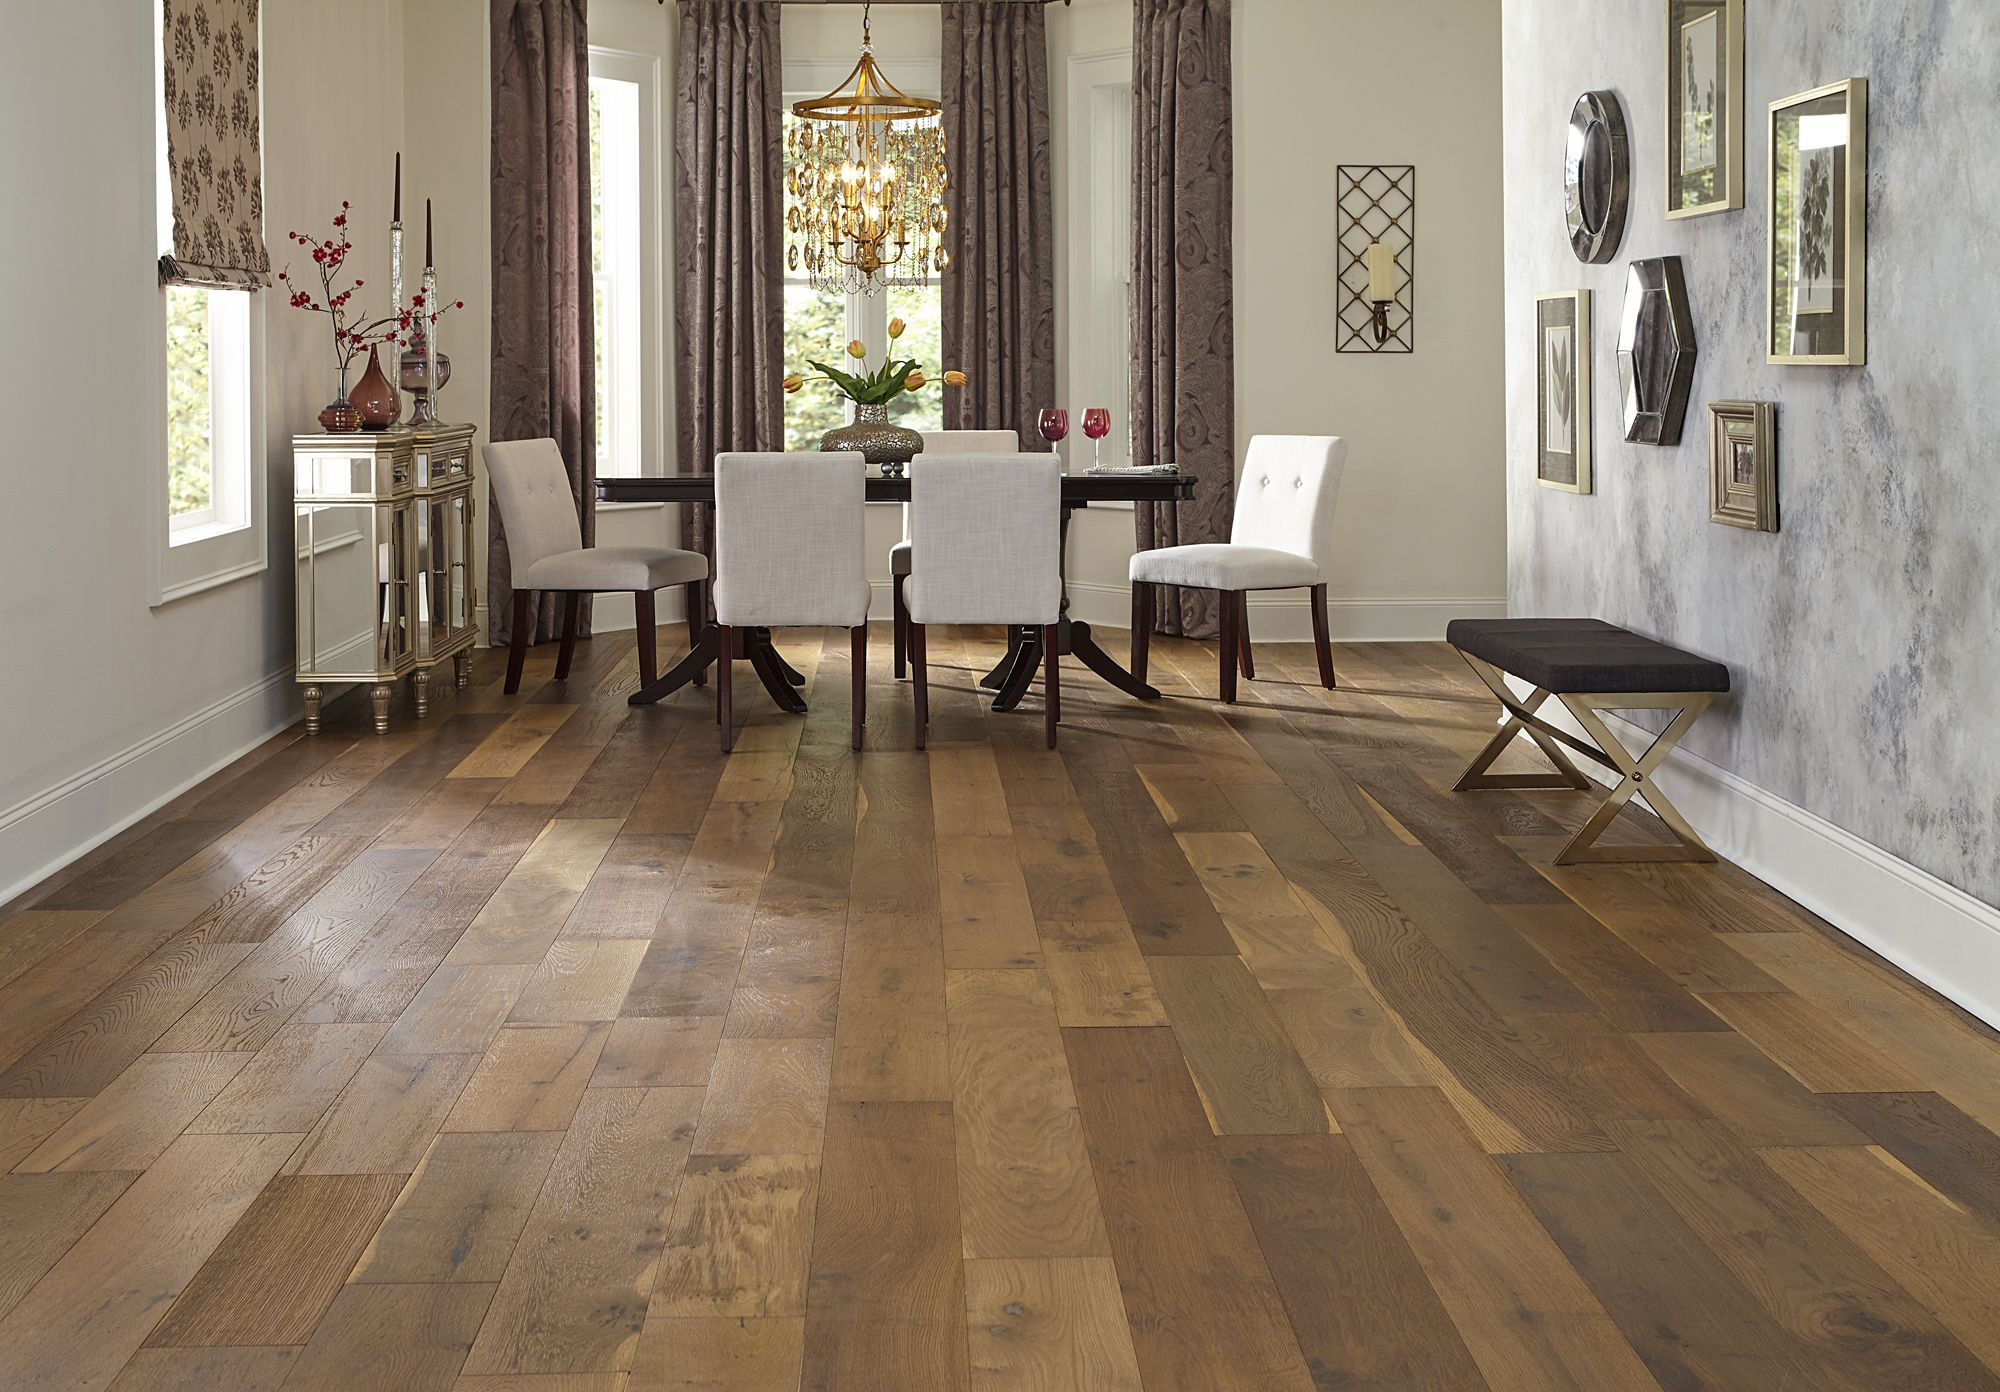 22 Awesome Wide Plank Grey Hardwood Flooring 2024 free download wide plank grey hardwood flooring of 7 1 2 wide planks and a rustic look bellawood willow manor oak has within 7 1 2 wide planks and a rustic look bellawood willow manor oak has a storied ol